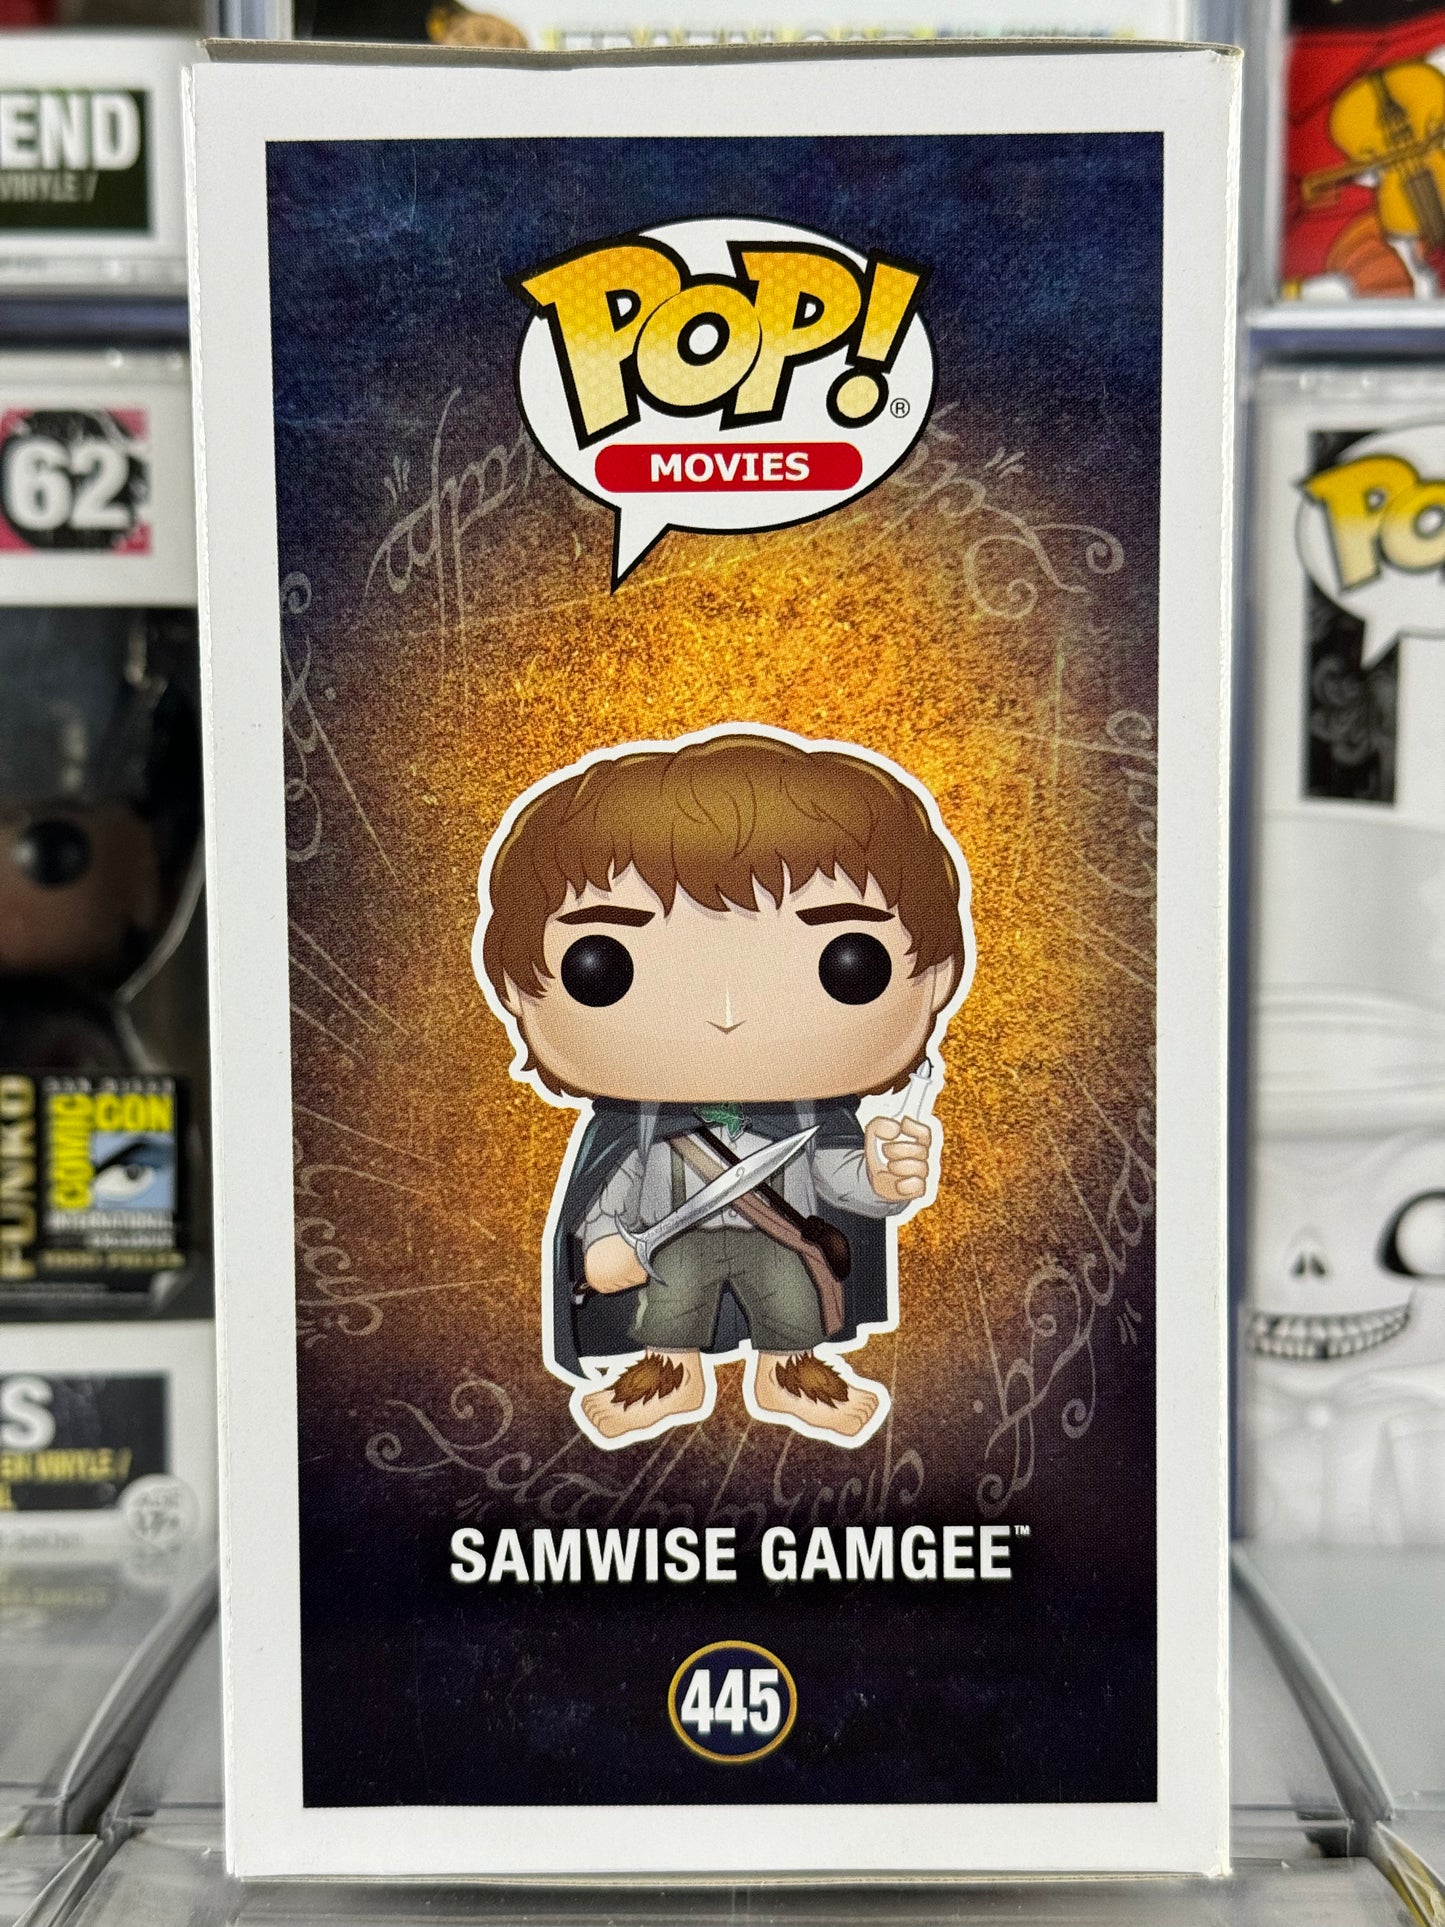 The Lord of the Rings - Samwise Gamgee (445)